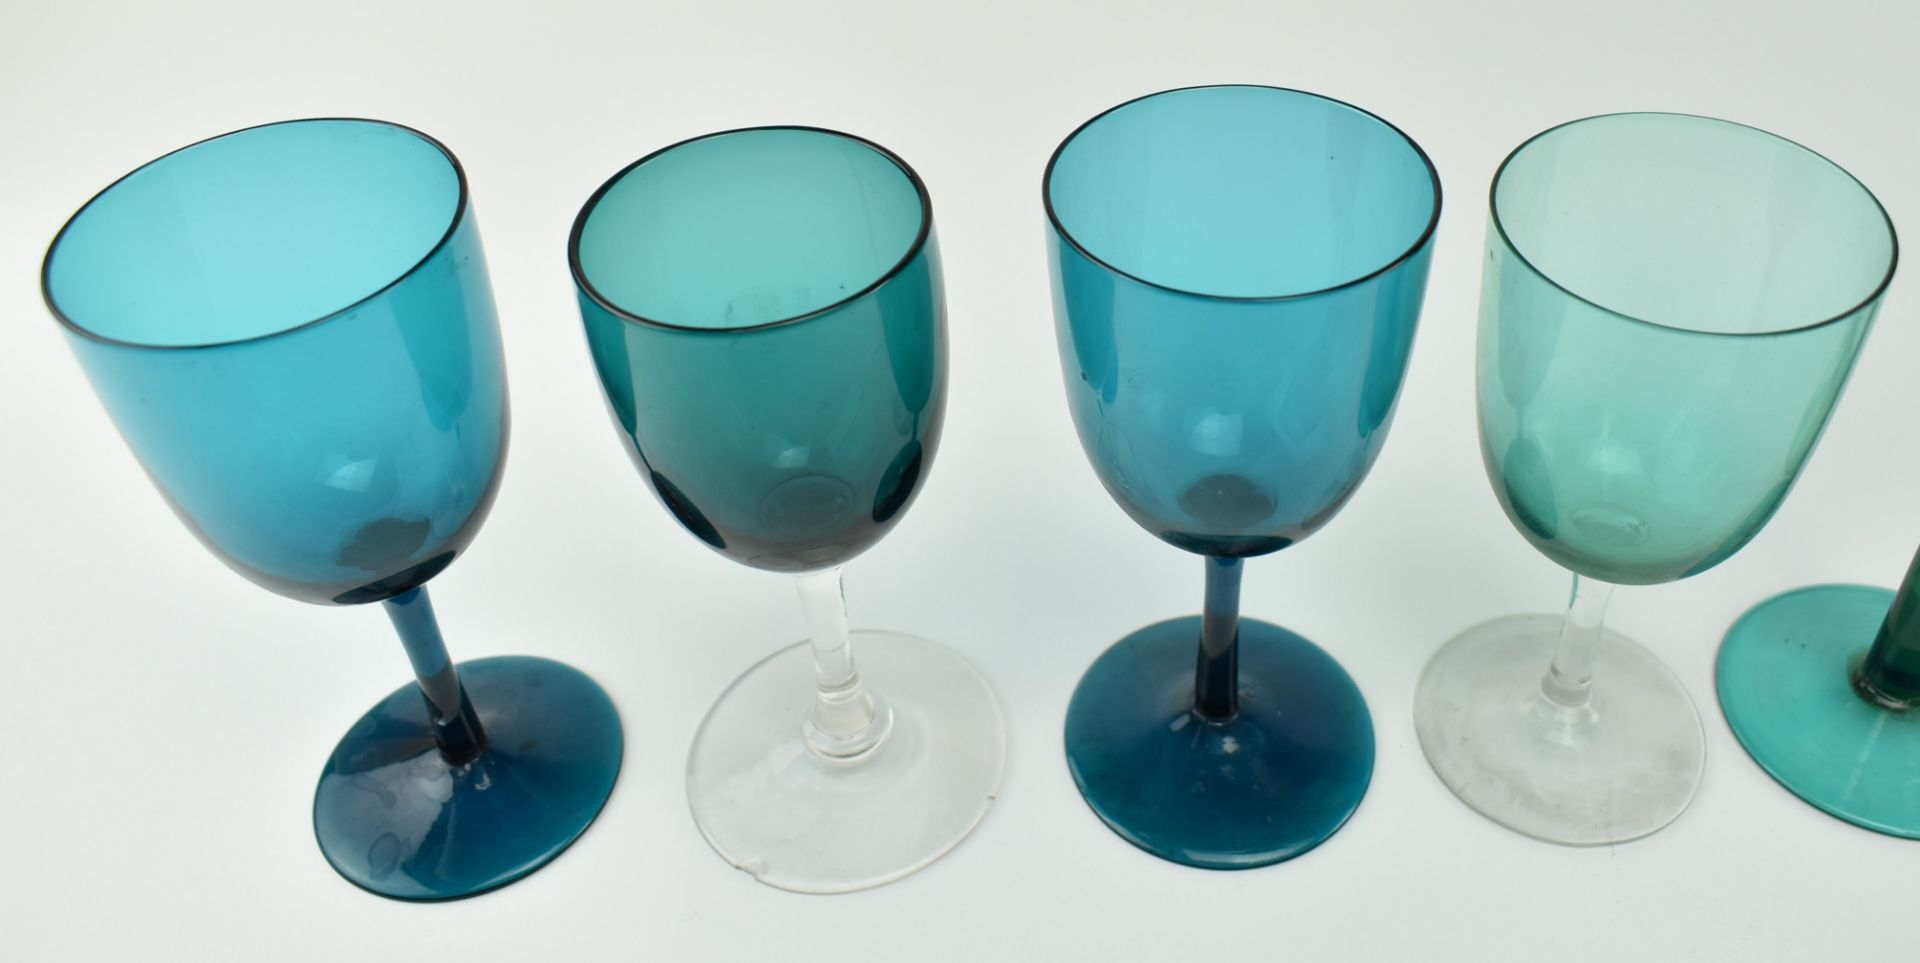 COLLECTION OF EARLY 20TH CENTURY TEAL DRINKING GLASSES - Image 5 of 11